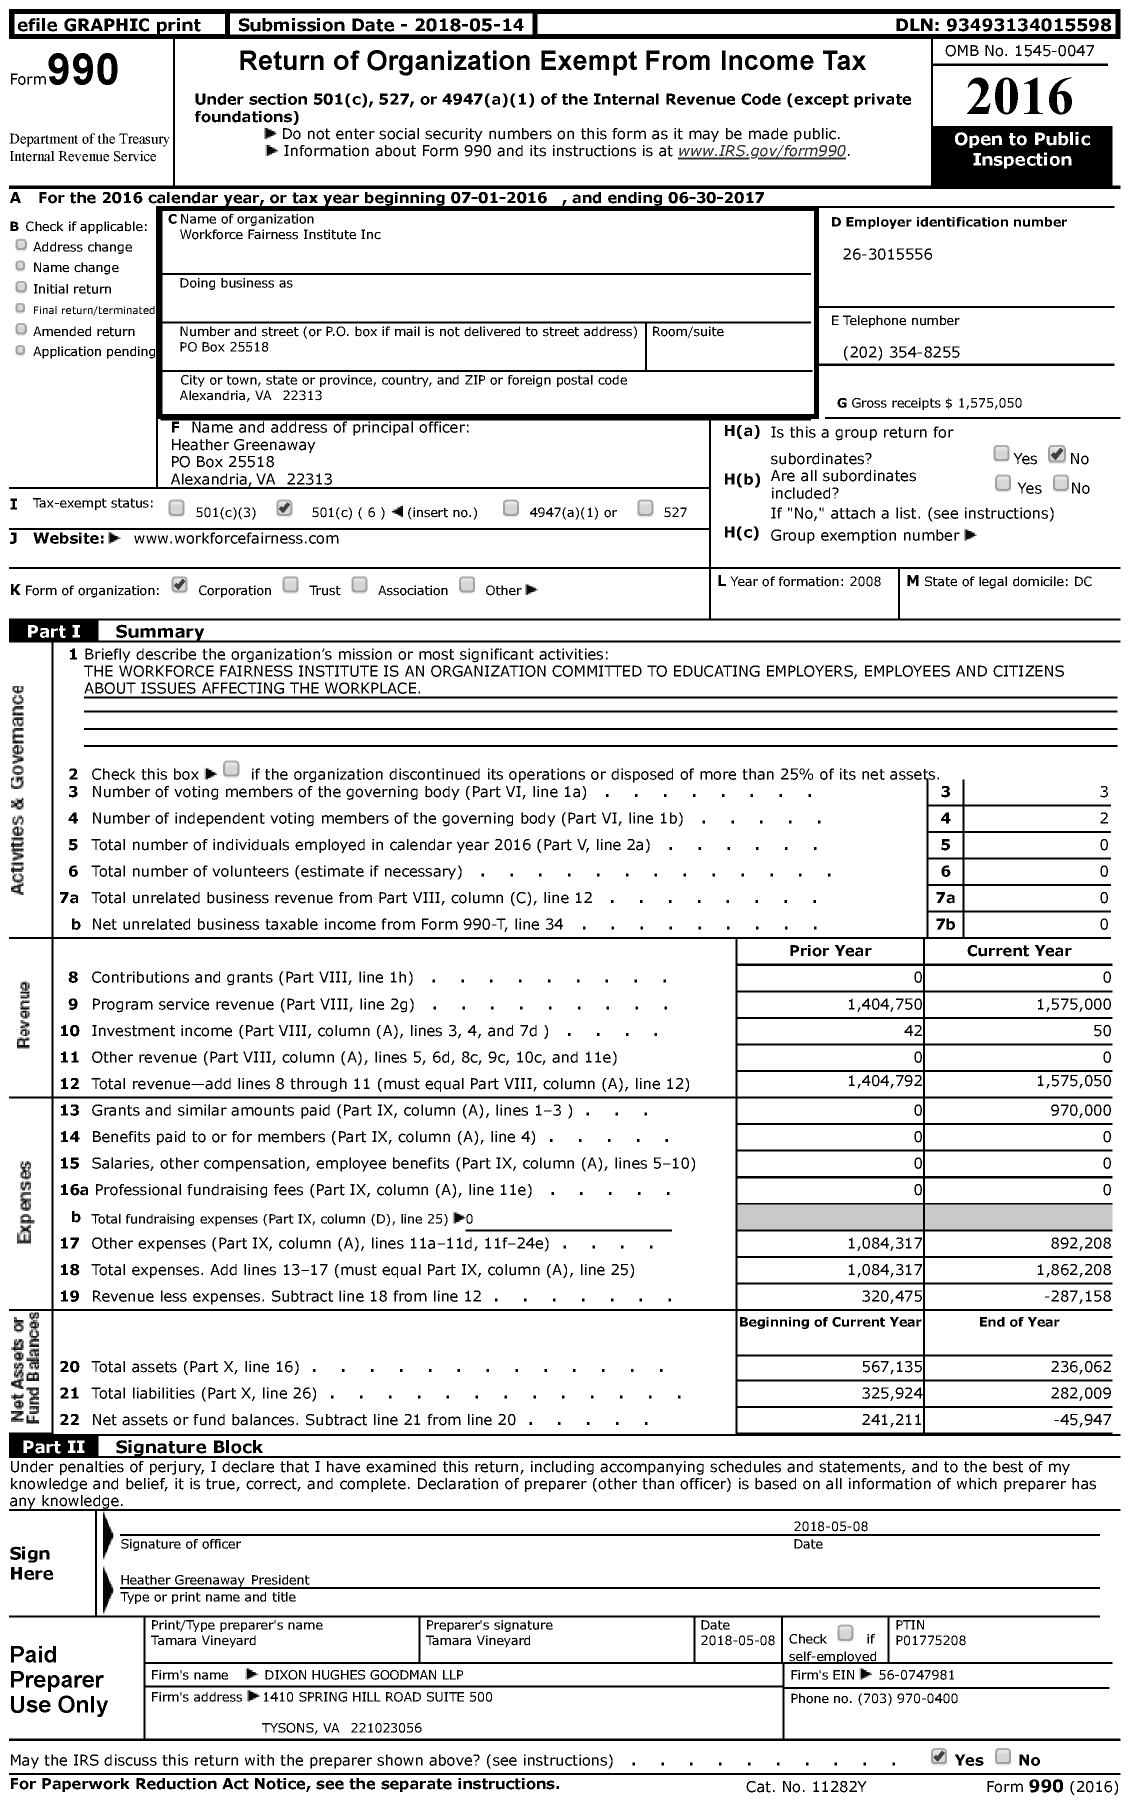 Image of first page of 2016 Form 990 for Workforce Fairness Institute (WFI)